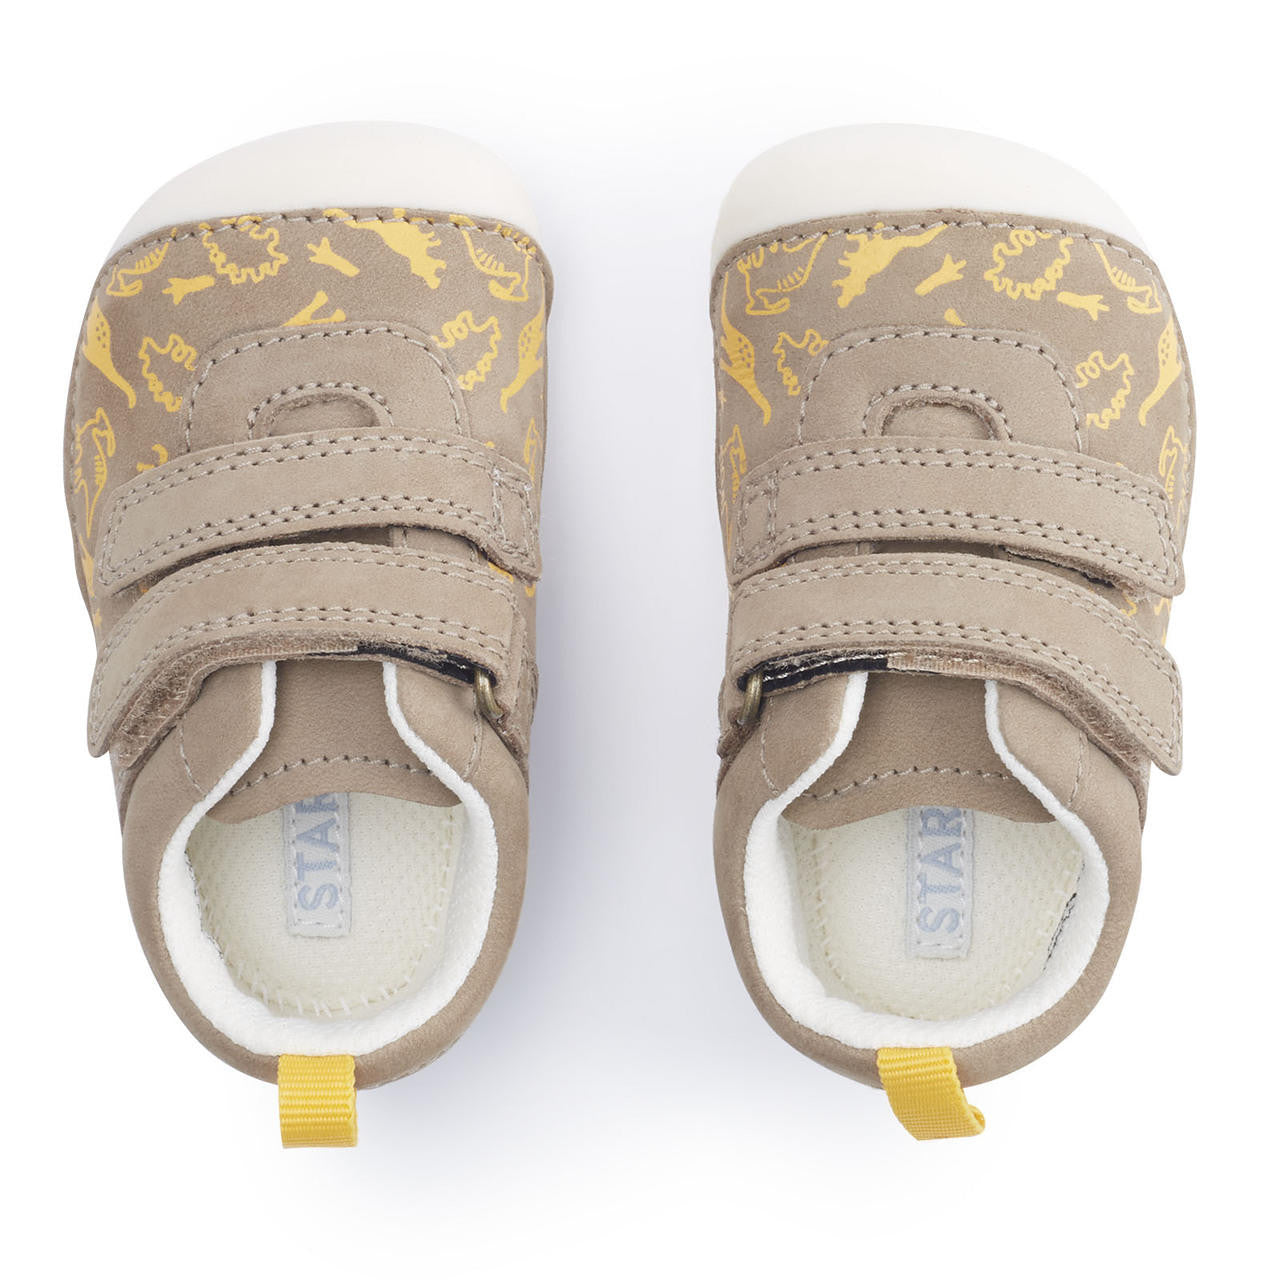 A pair of boys pre walkers by Start Rite, style Roar, in beige and yellow nubuck with double velcro fastening. Top view.